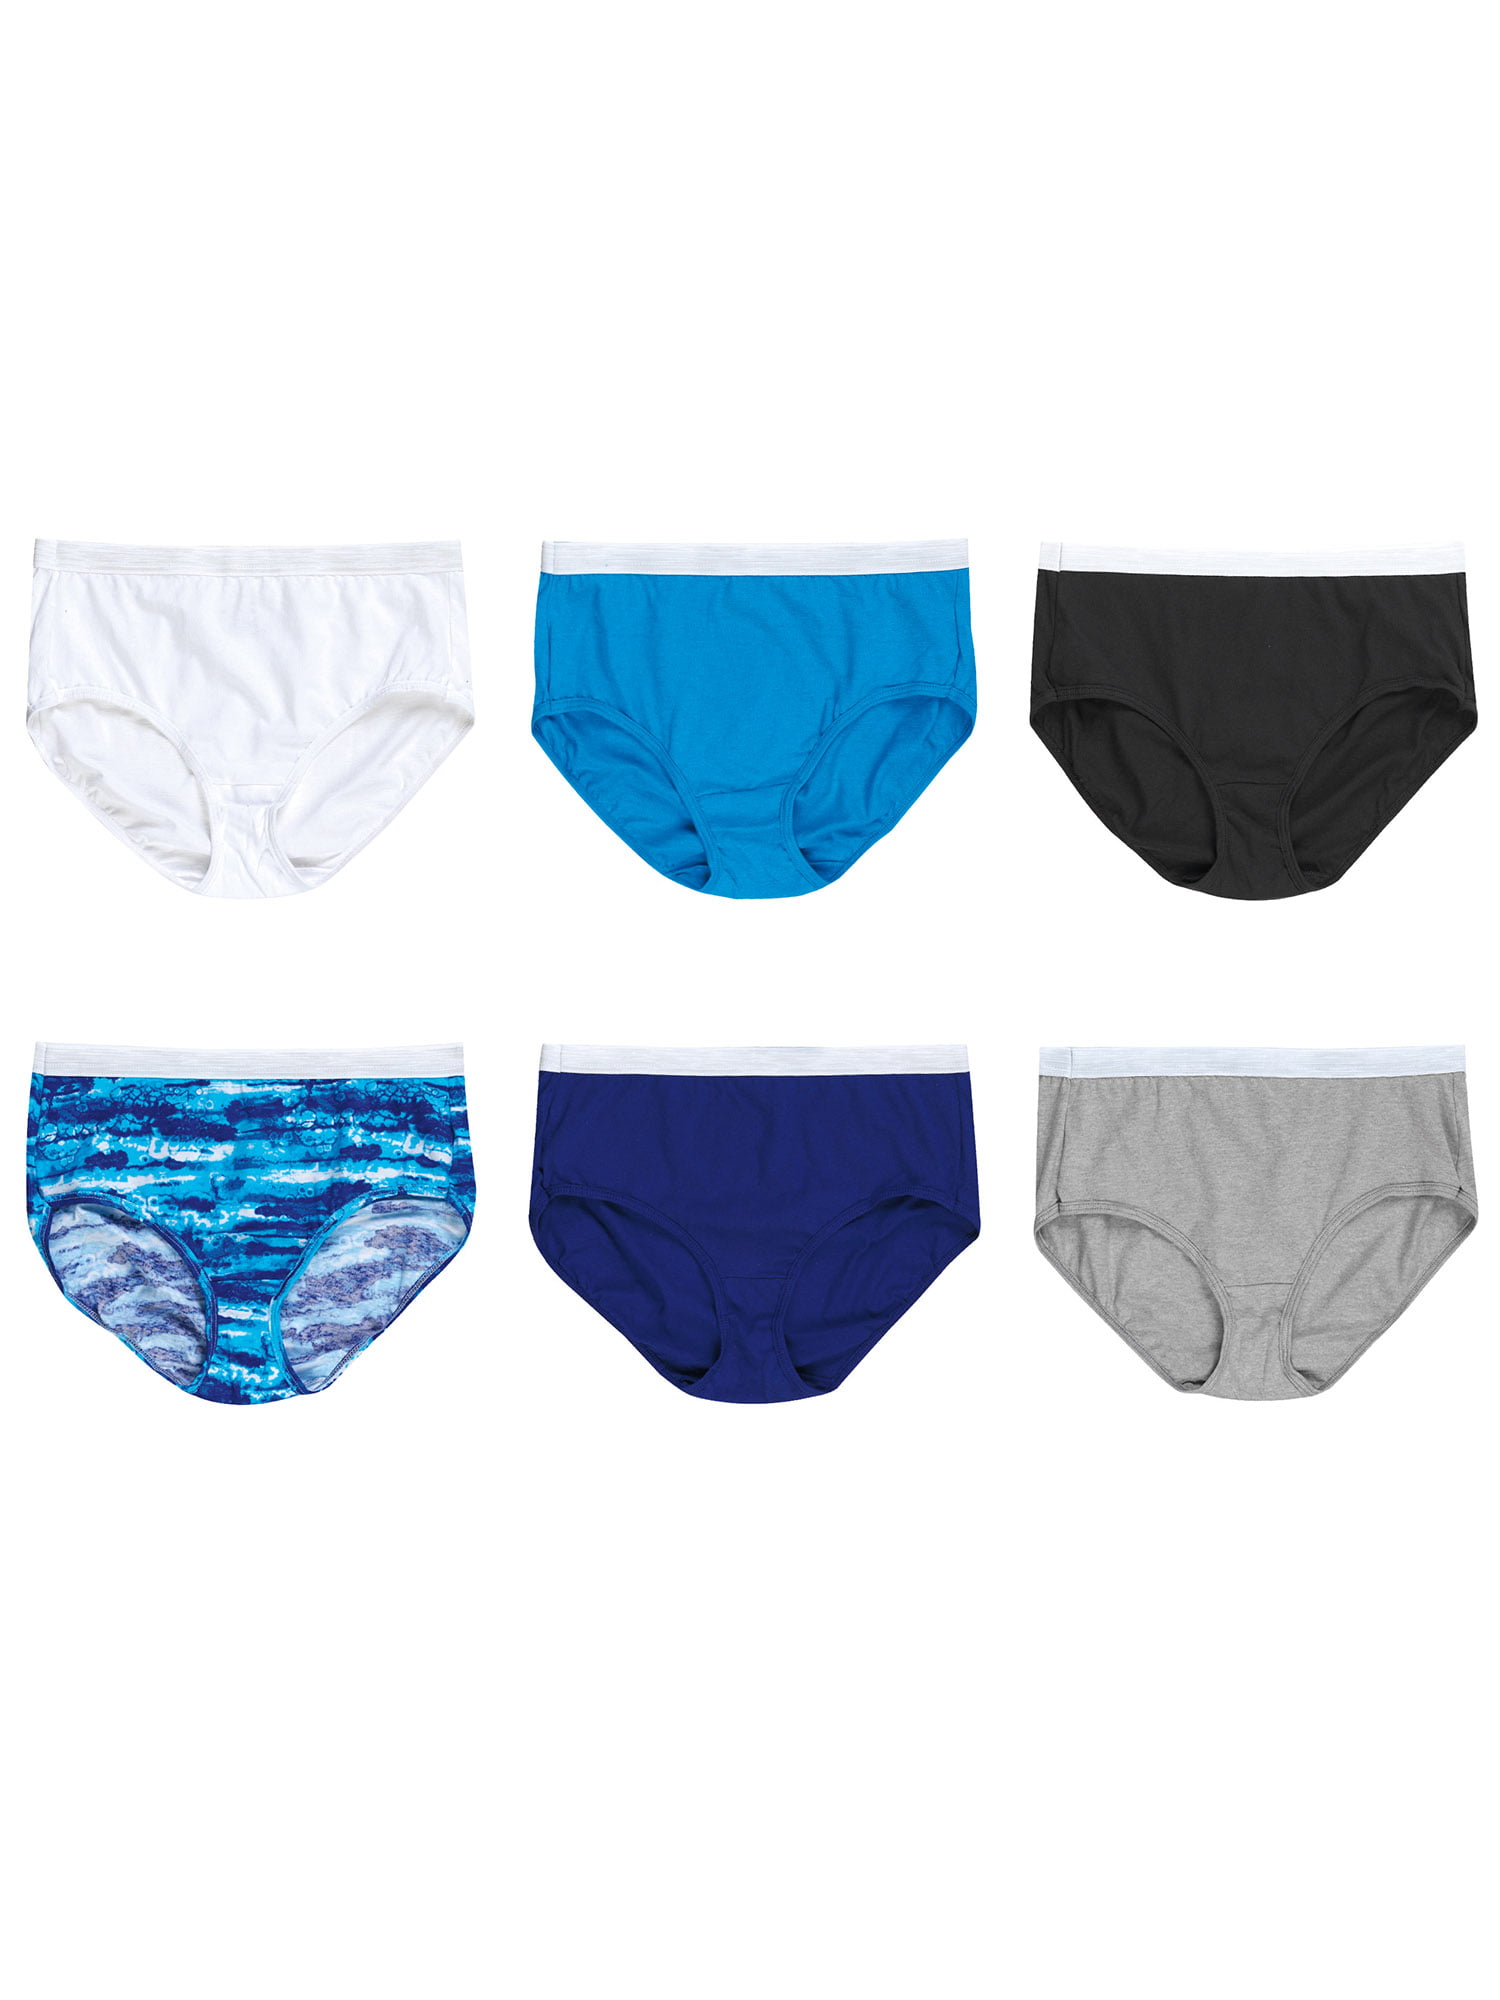 Hanes Women's Boy Brief Panties Cotton 6-Pack Sporty Assorted Colors Size 5- 9 - AbuMaizar Dental Roots Clinic